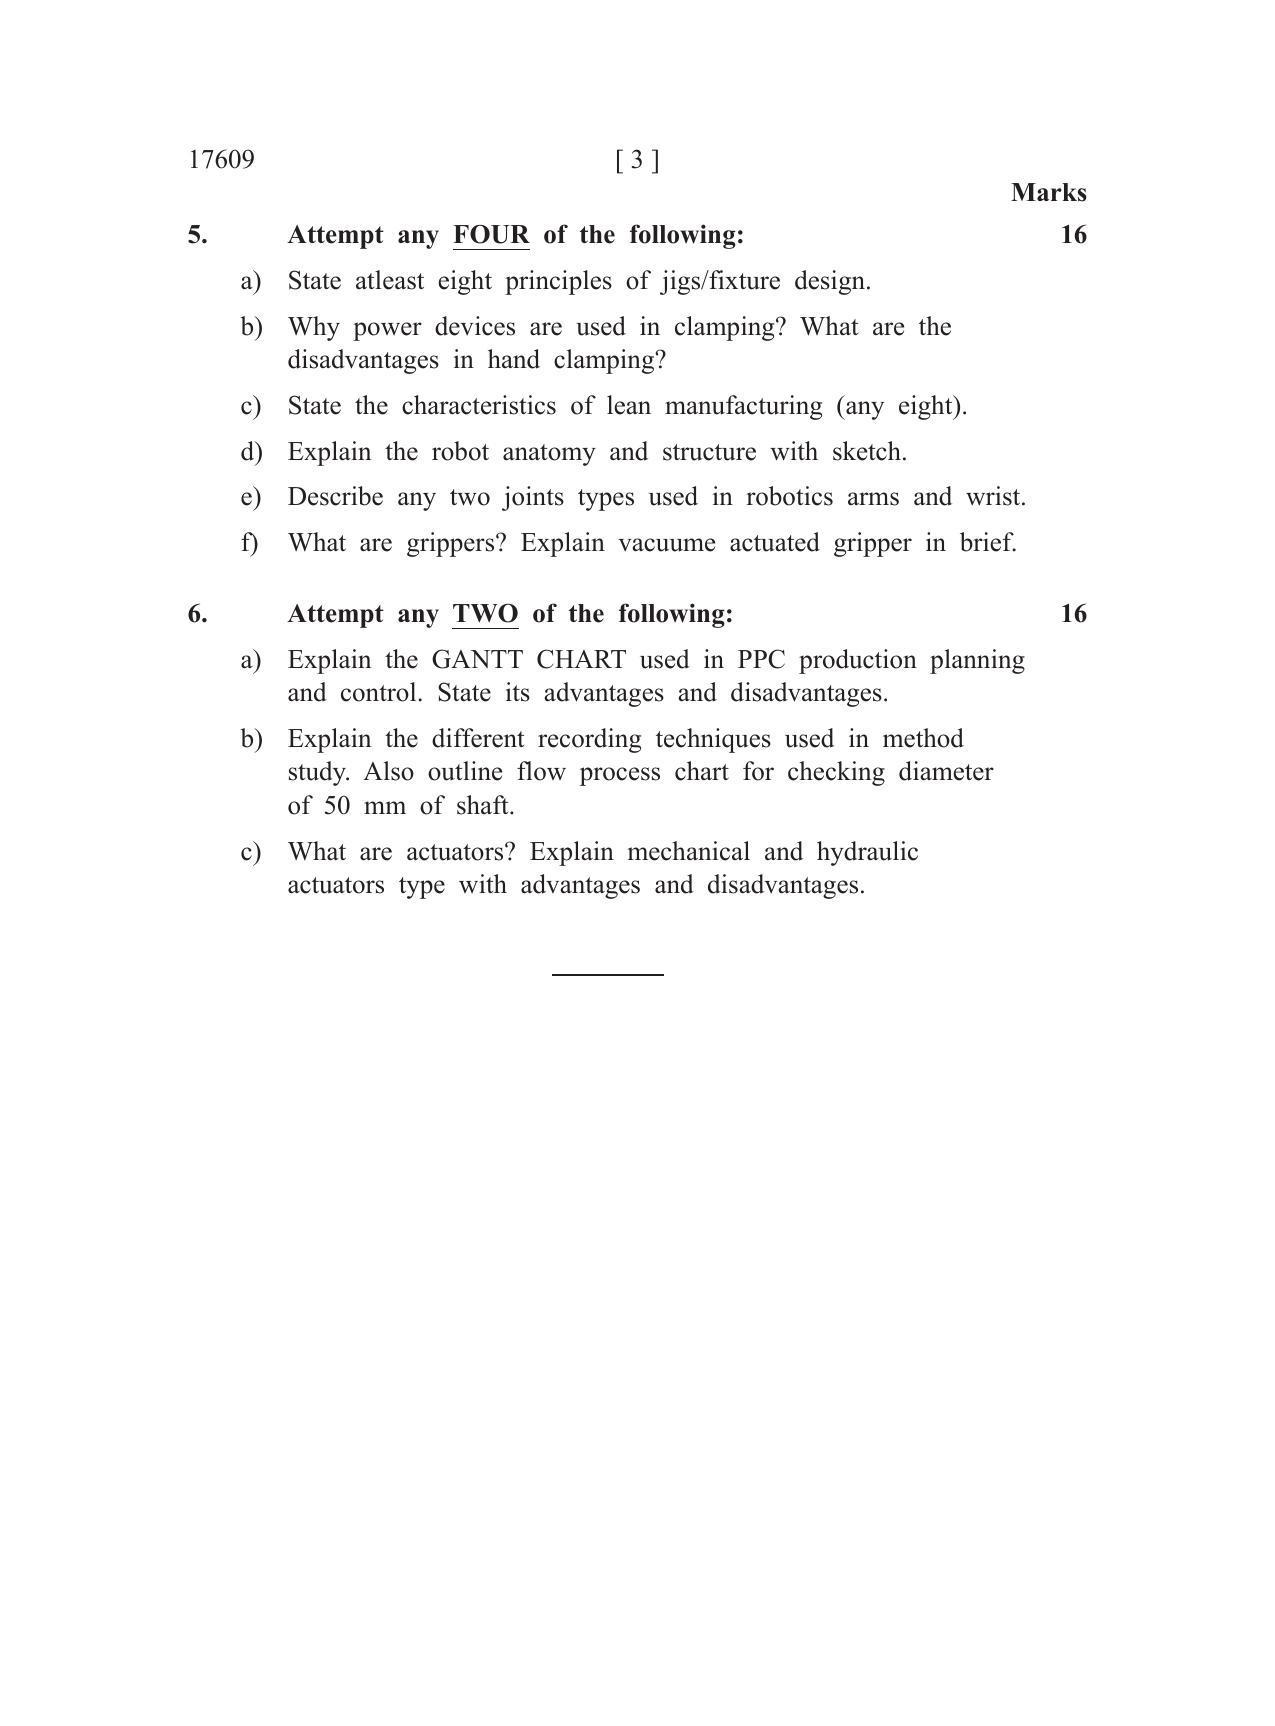 MSBTE Summer Question Paper 2019 - Production Engineering & Robotics - Page 3